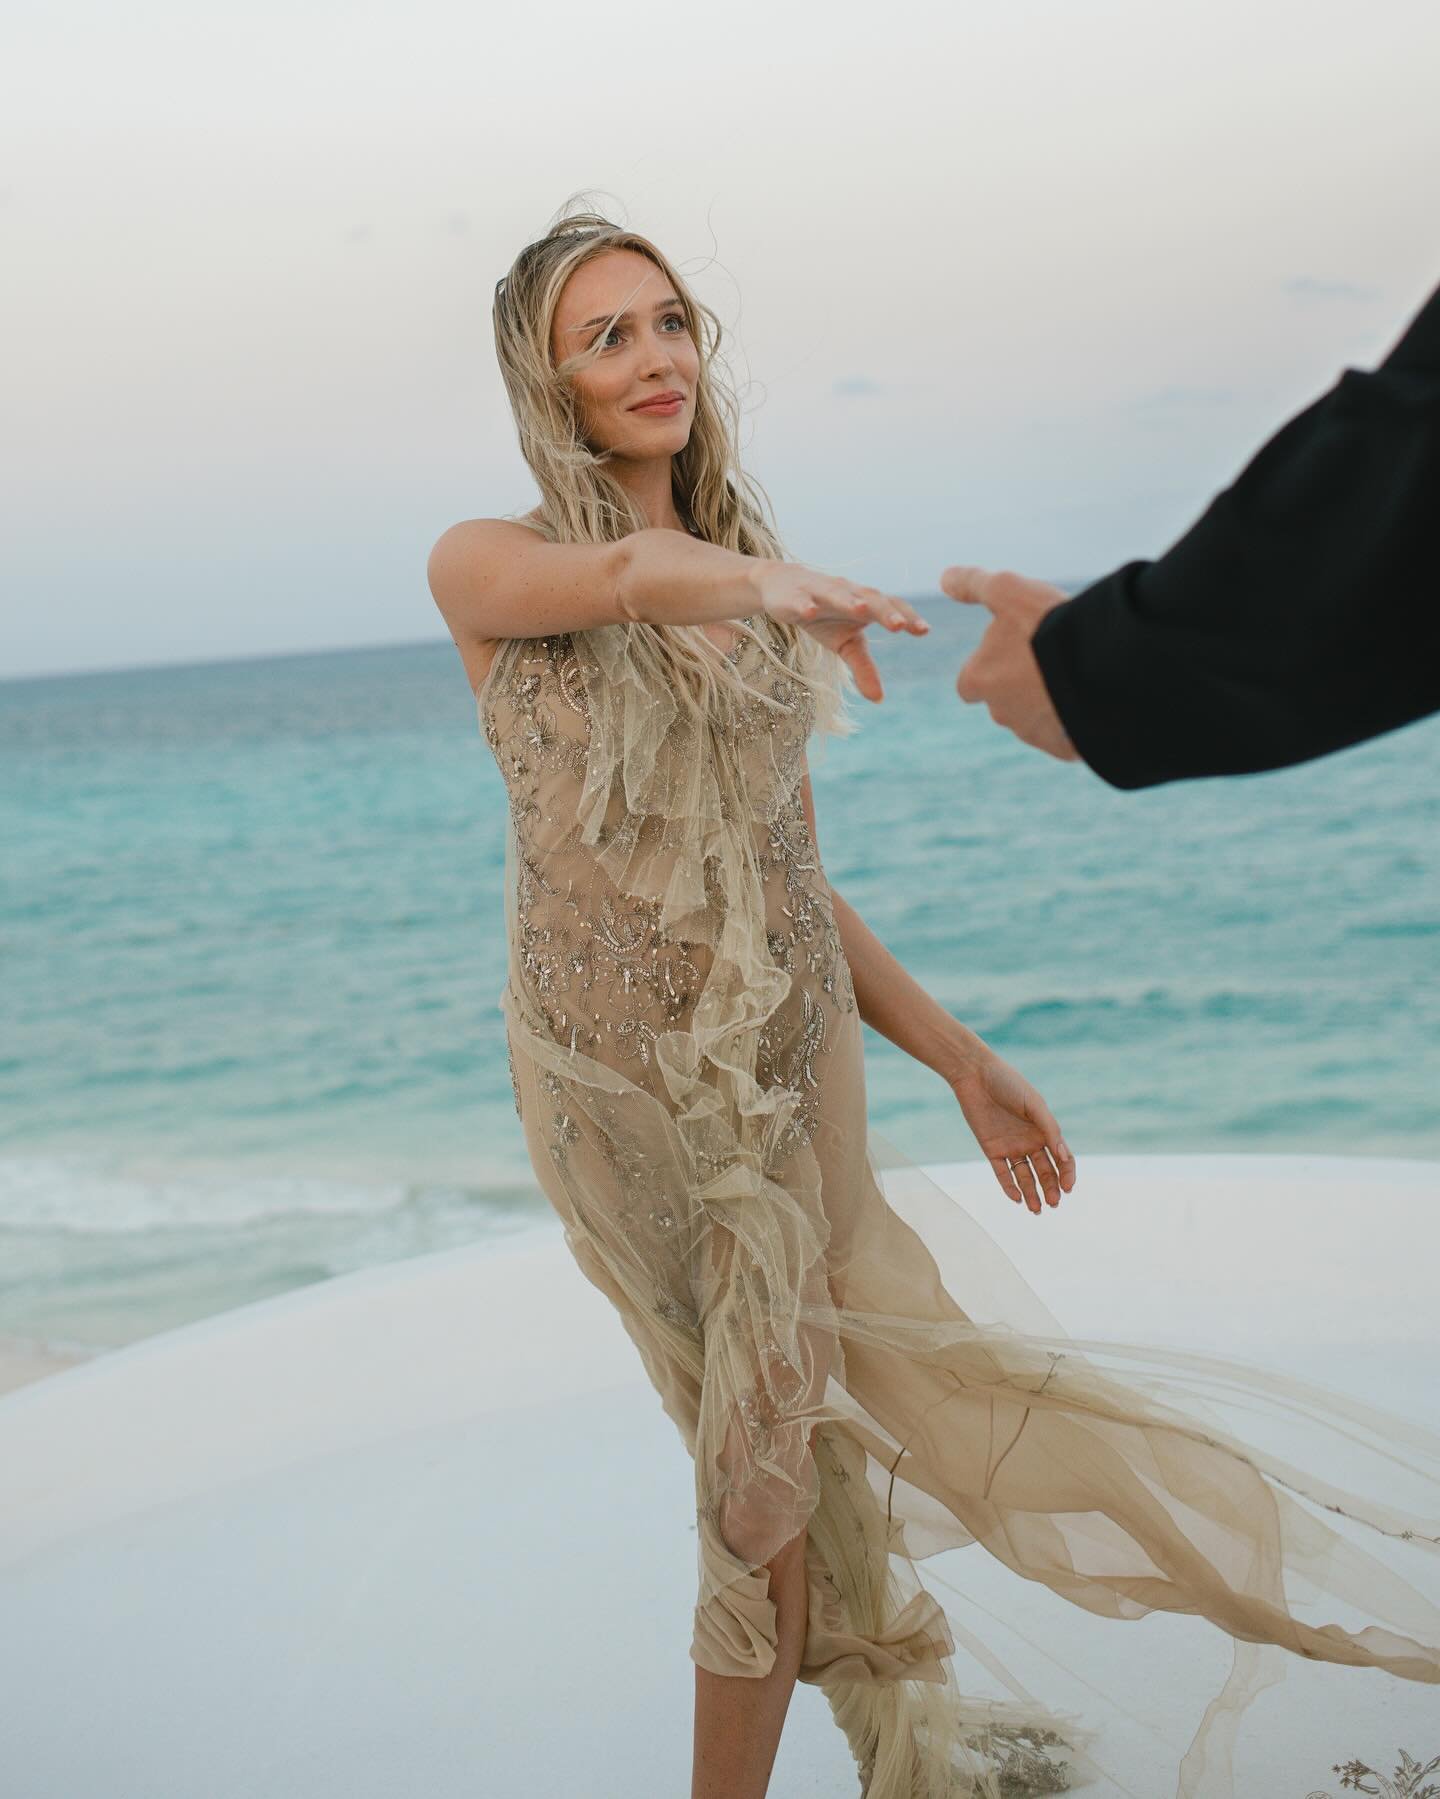 Night two of @alexandracooper and Matt Kaplan&rsquo;s wedding was held along the shores of the Riviera Maya. Heartfelt toasts, s&rsquo;mores on the beach and a vintage Donna Karan number made for a memorable evening. See the full feature in @voguewed